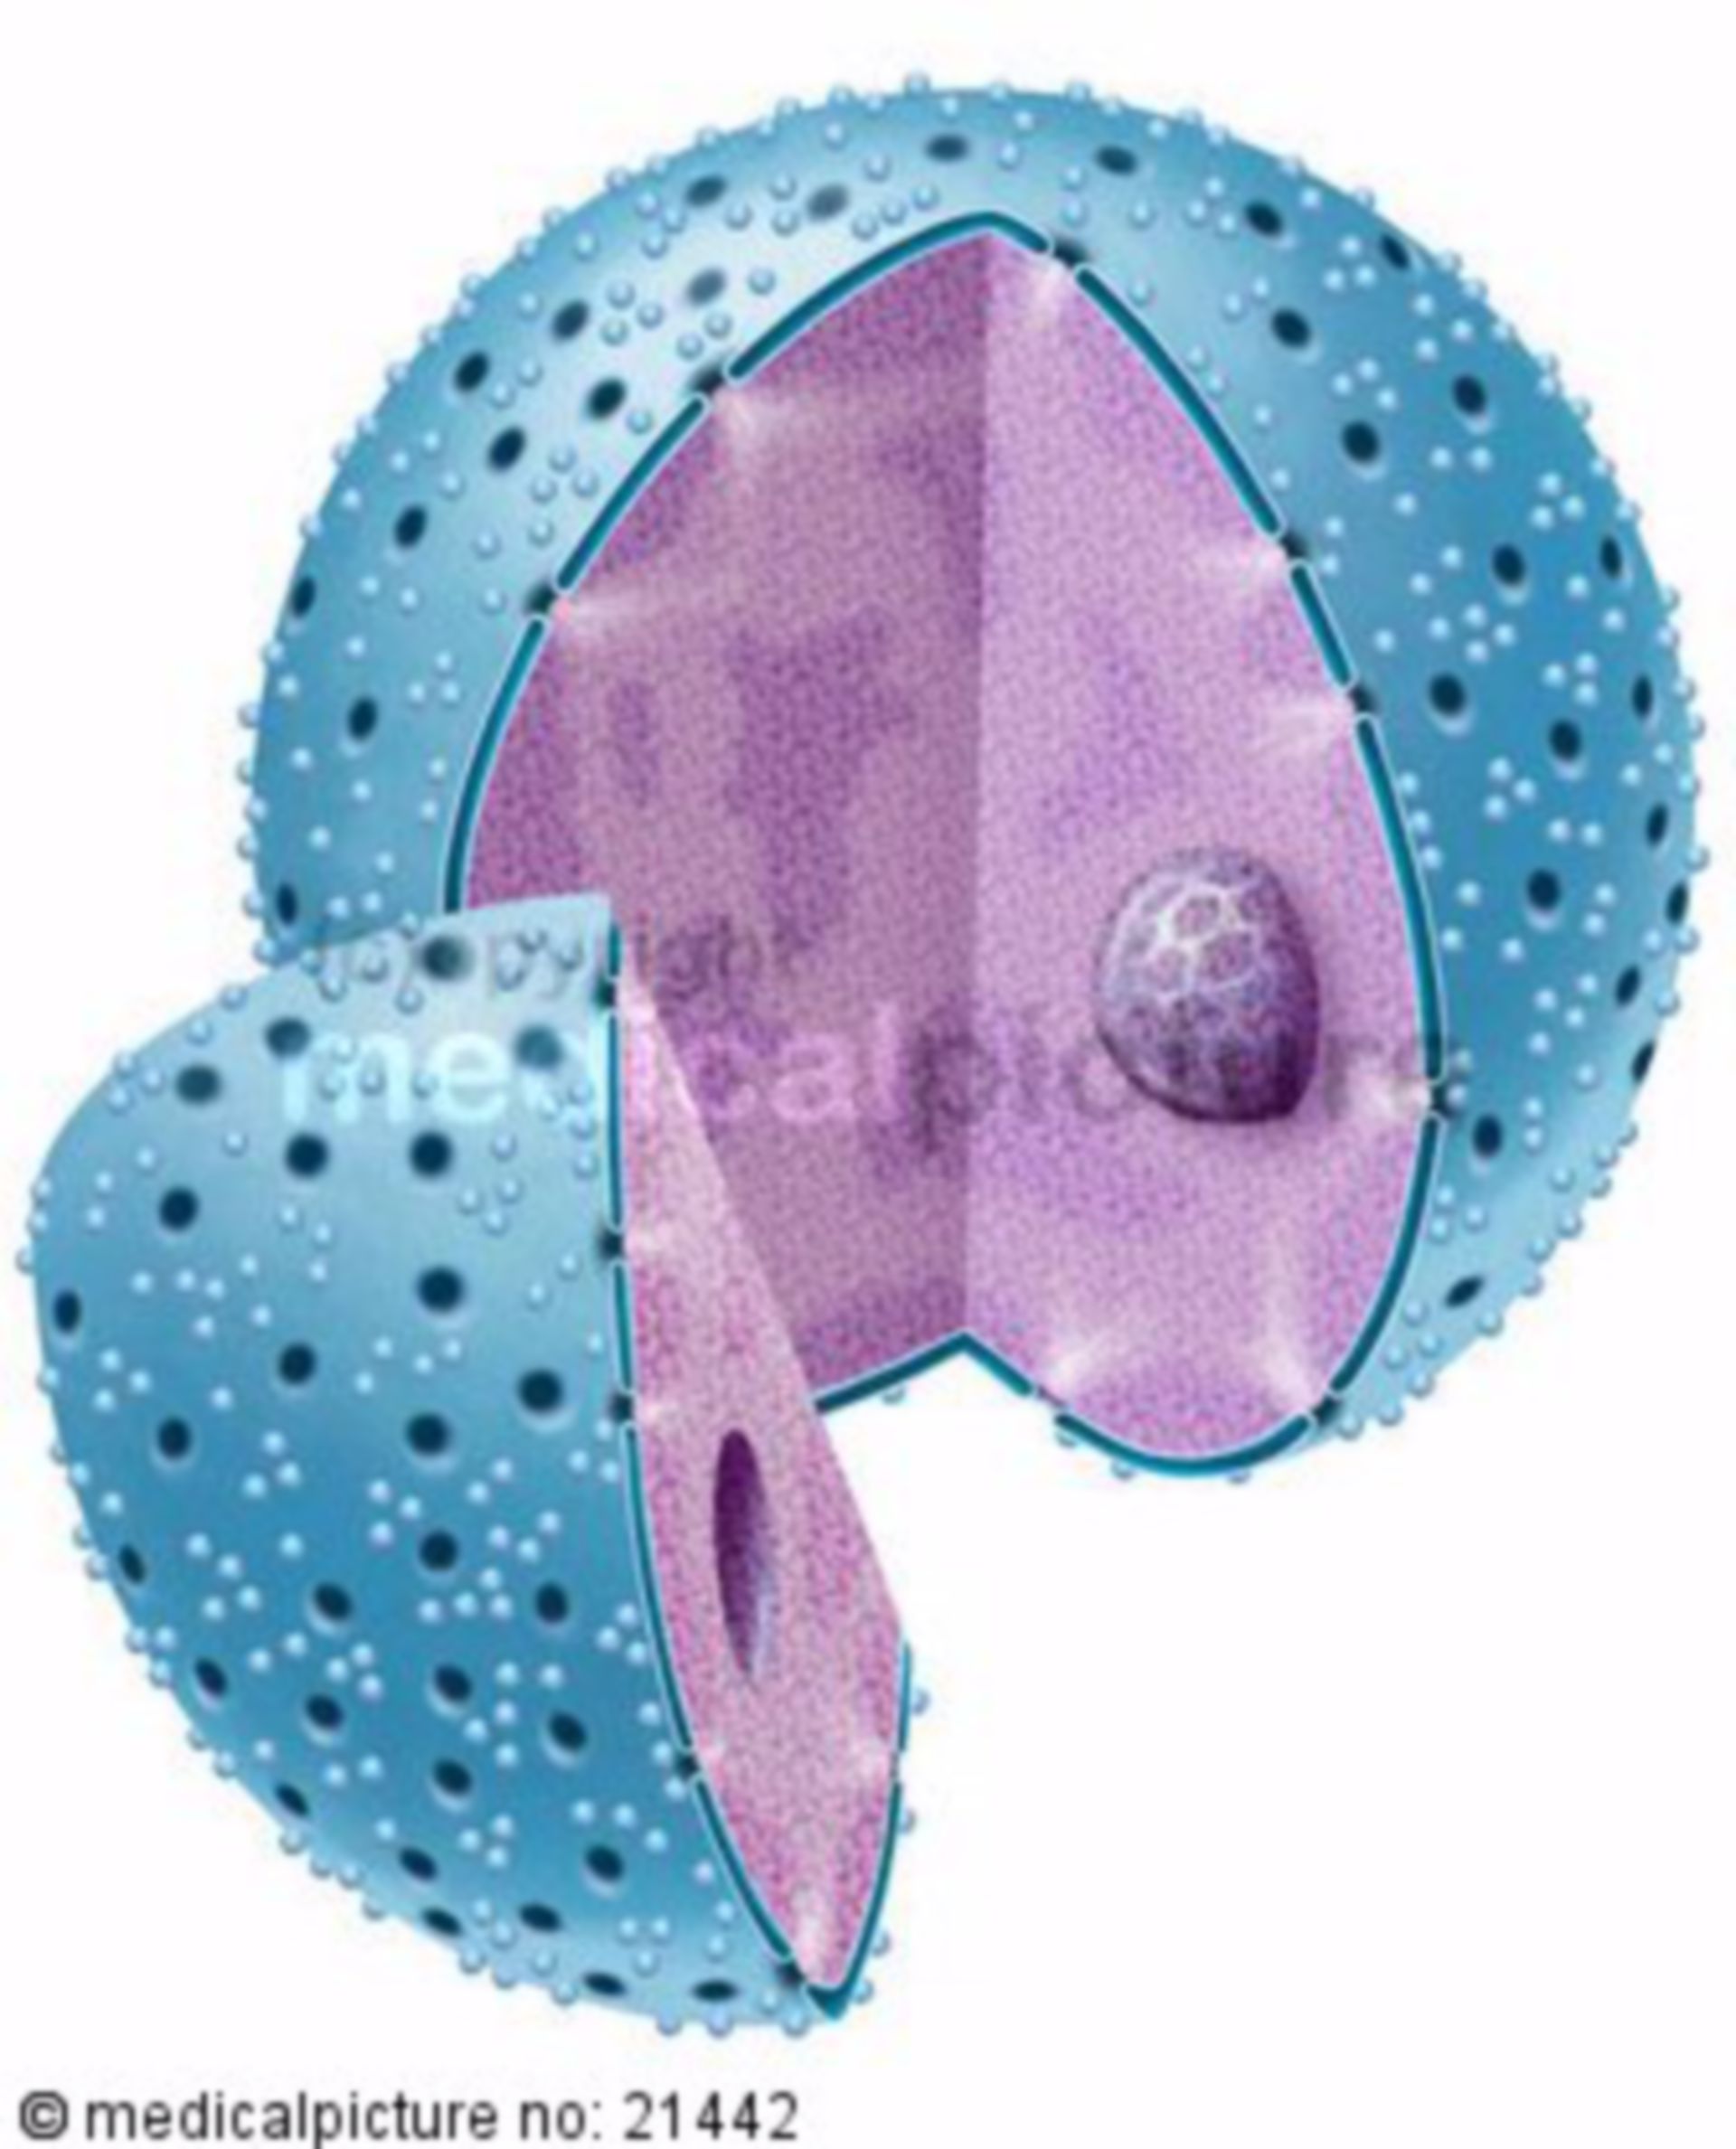 Nucleus with nucleoles